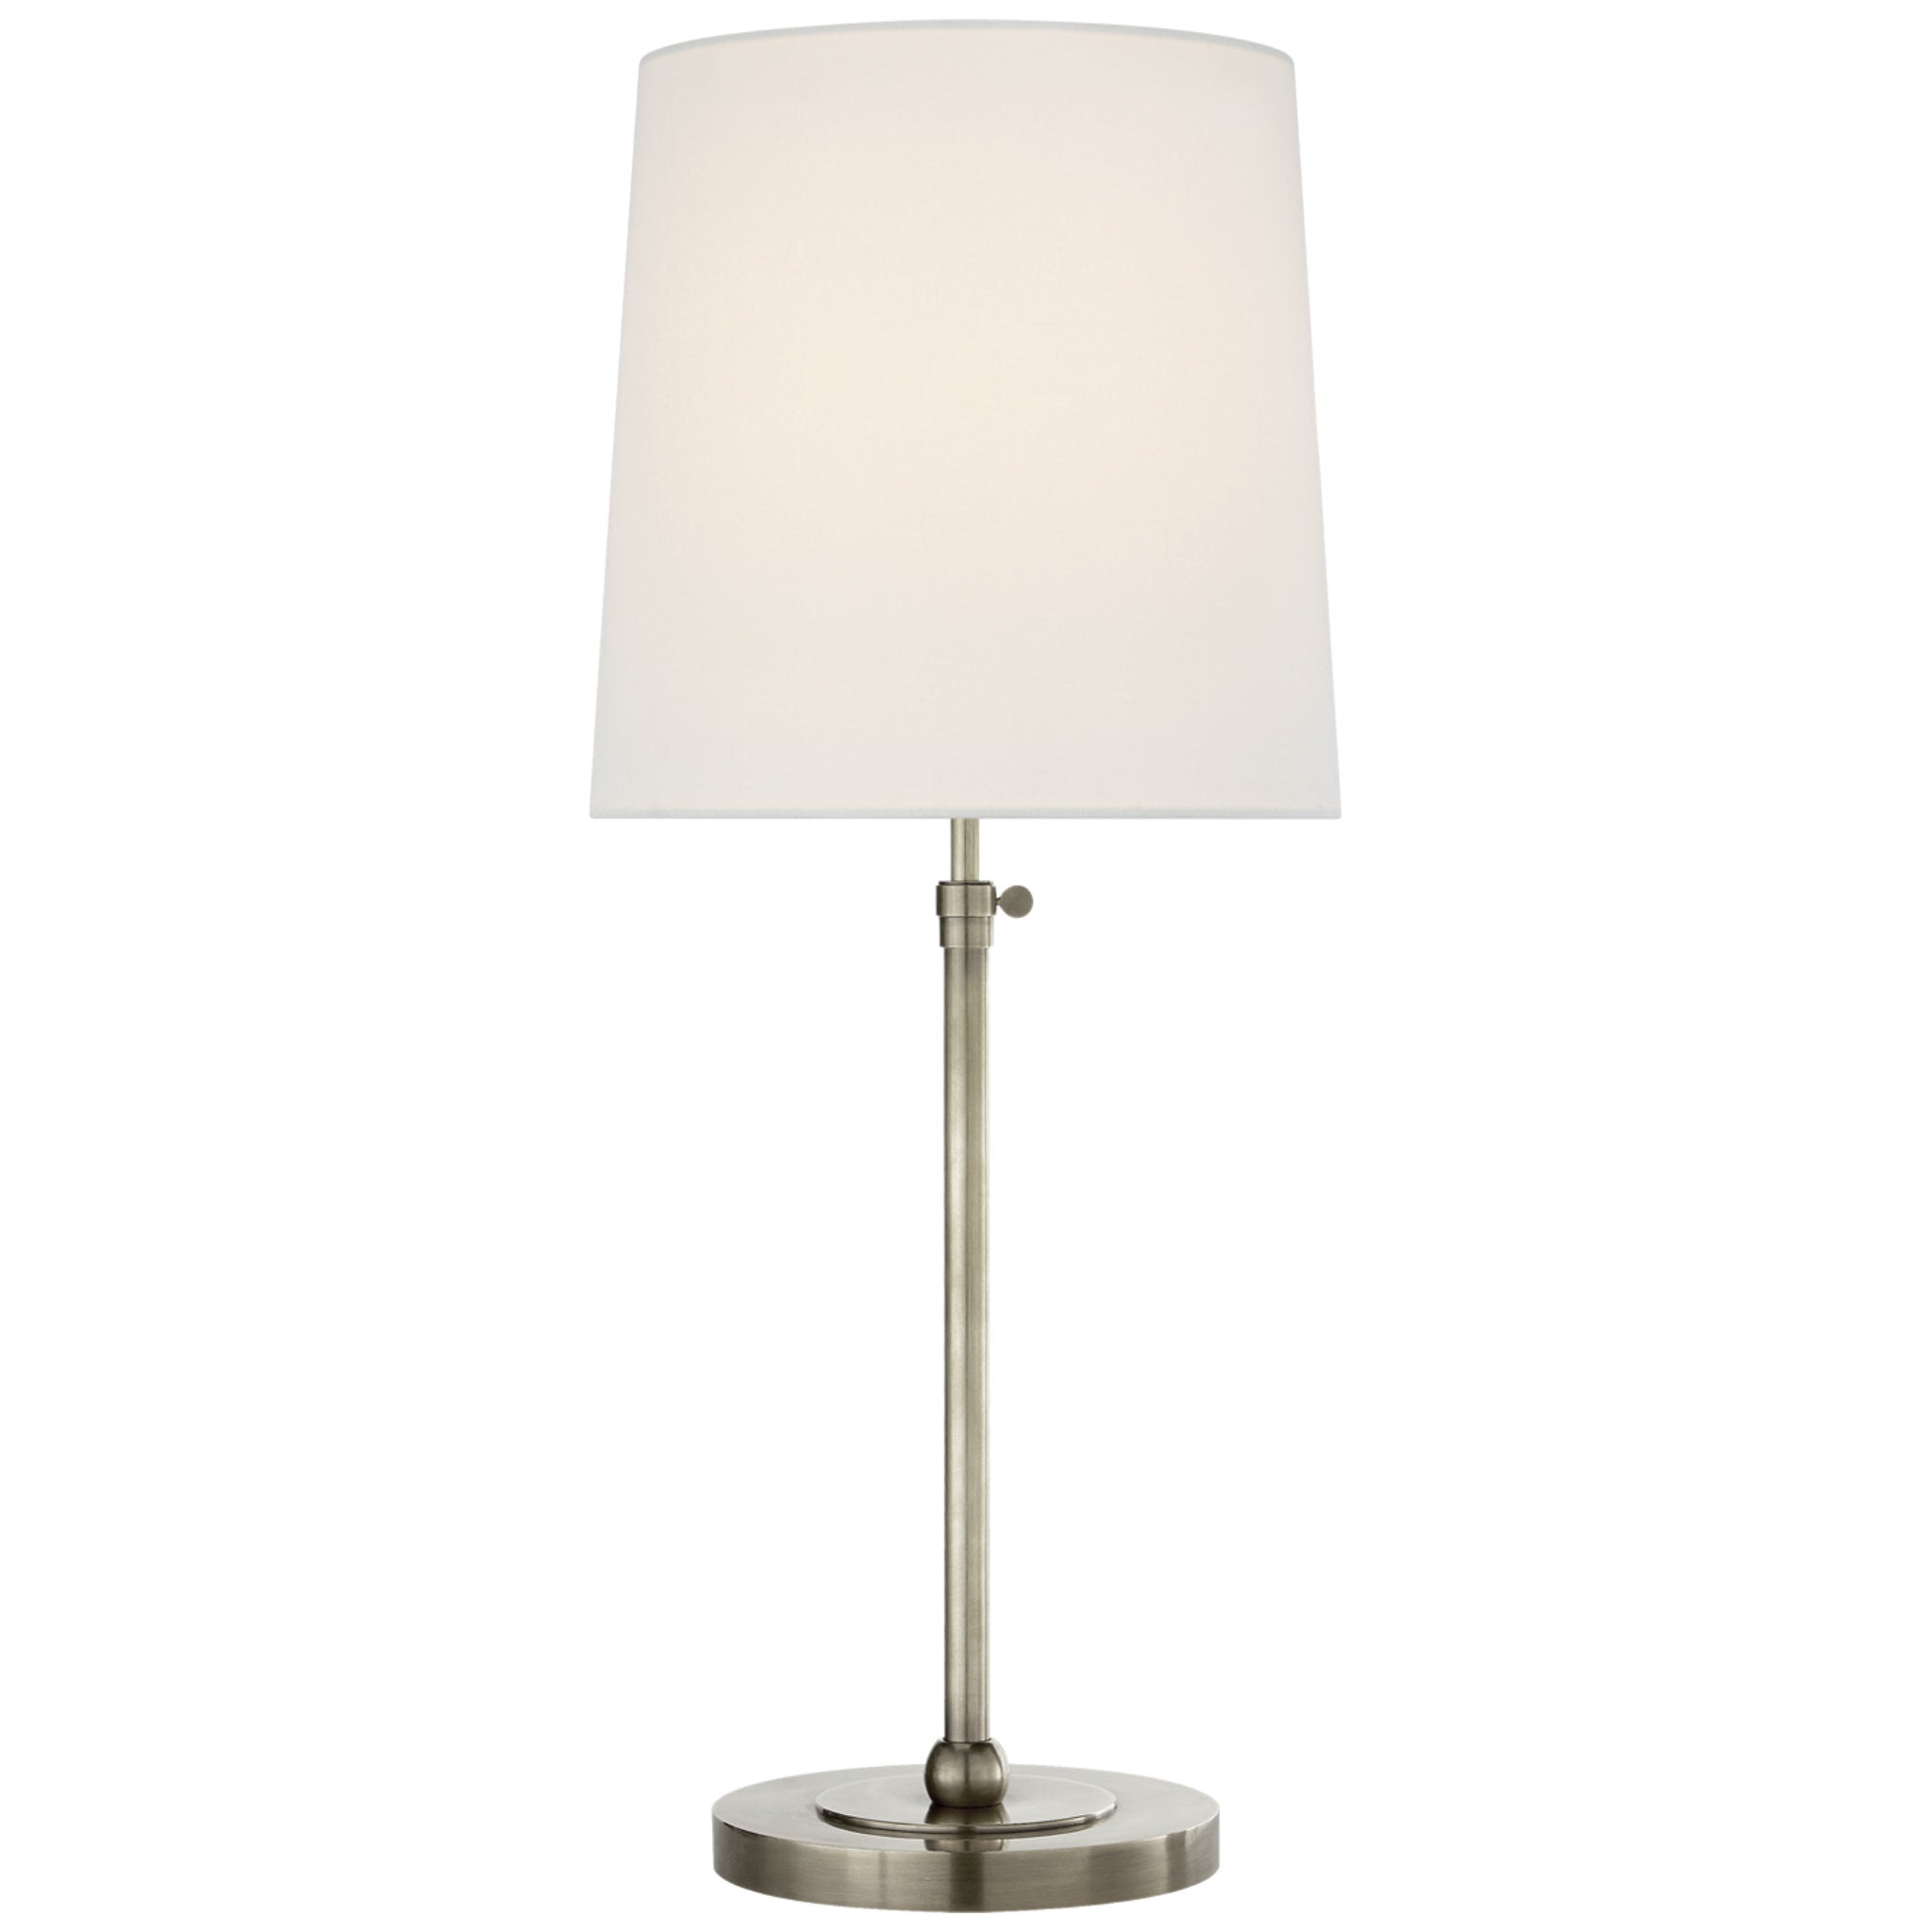 Thomas O'Brien Bryant Large Table Lamp in Antique Nickel with Linen Shade